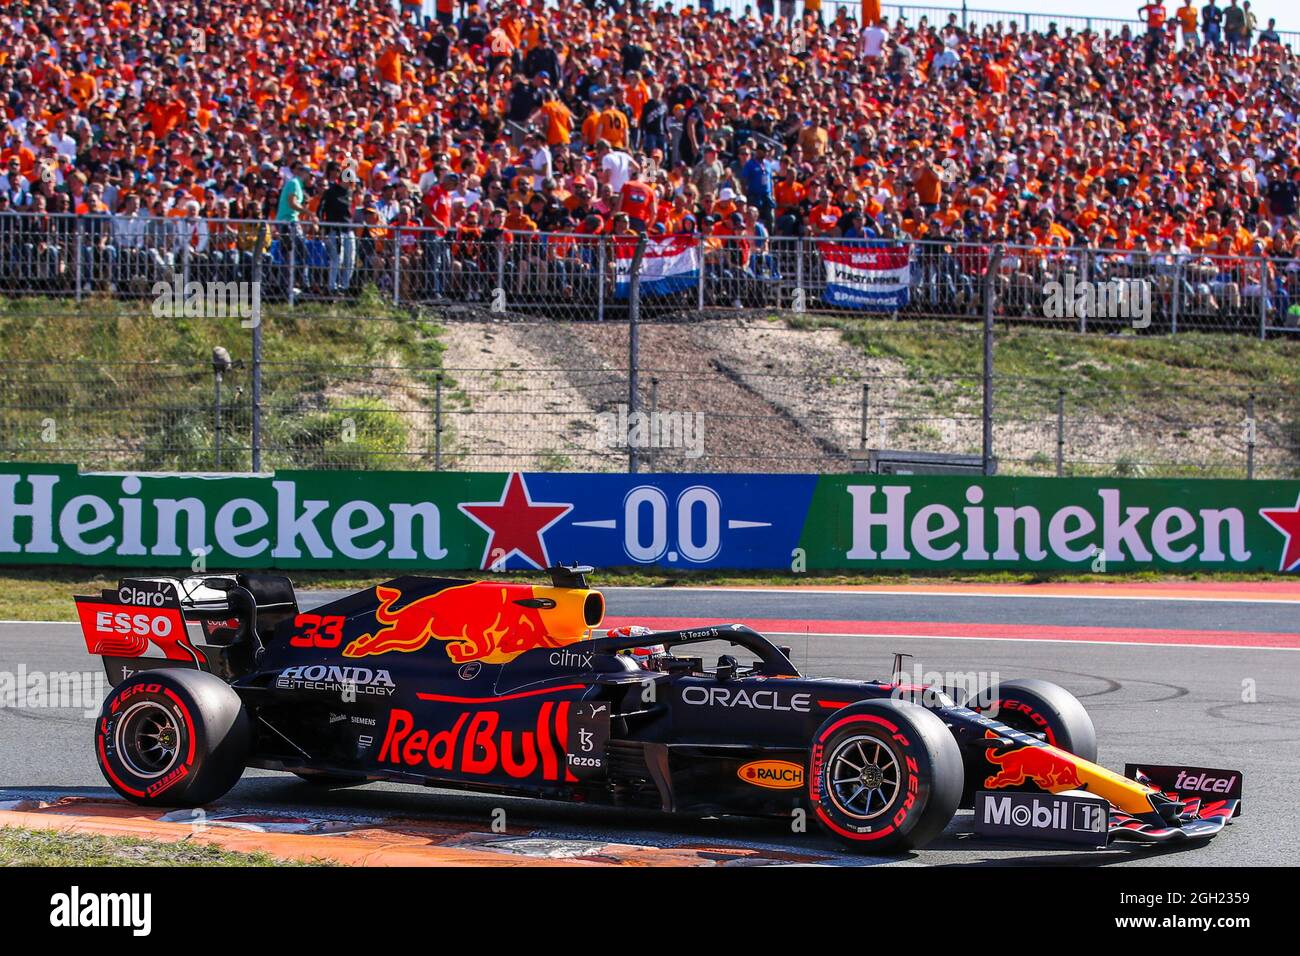 ZANDVOORT, NETHERLANDS - SEPTEMBER 4: Max Verstappen of Netherlands and Red  Bull Racing during the Qualification of F1 Grand Prix of The Netherlands at  Circuit Zandvoort on September 4, 2021 in Zandvoort,